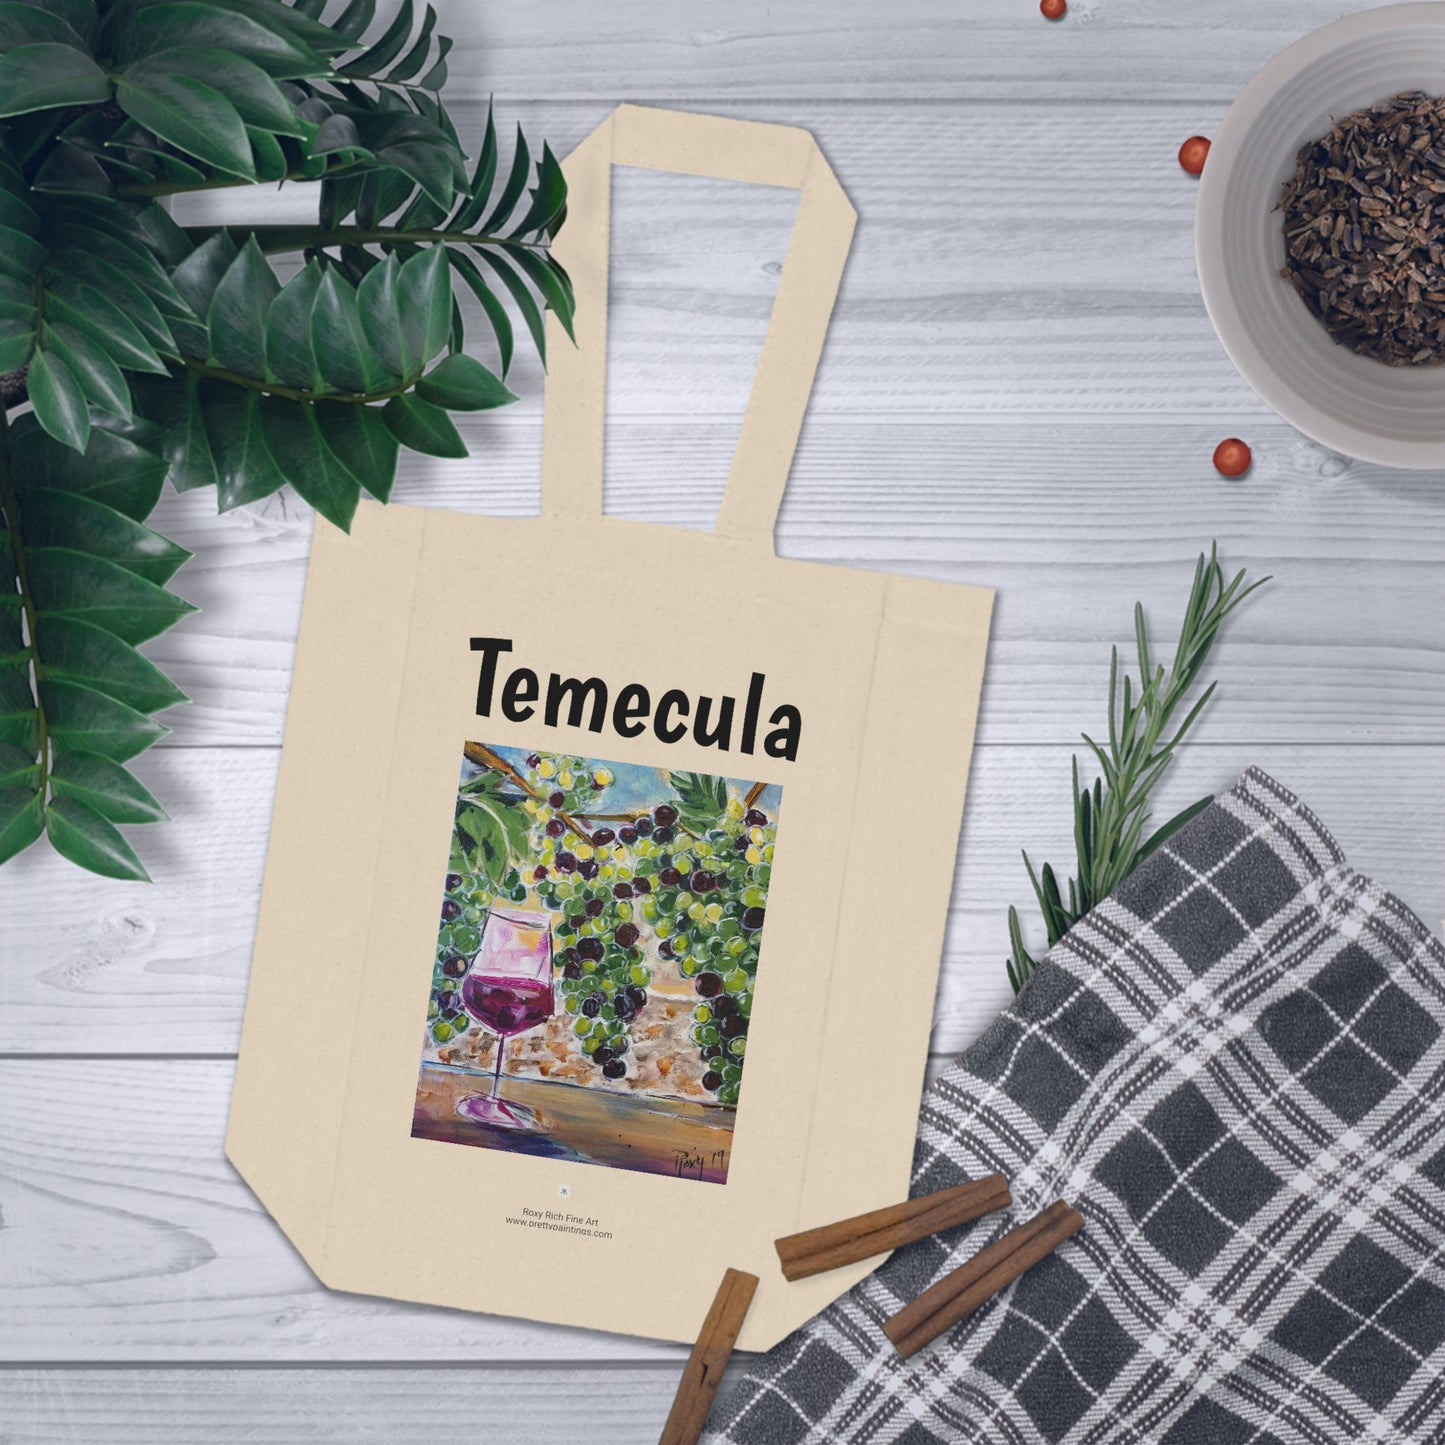 Temecula Double Wine Tote Bag featuring "Summer Grapes" painting